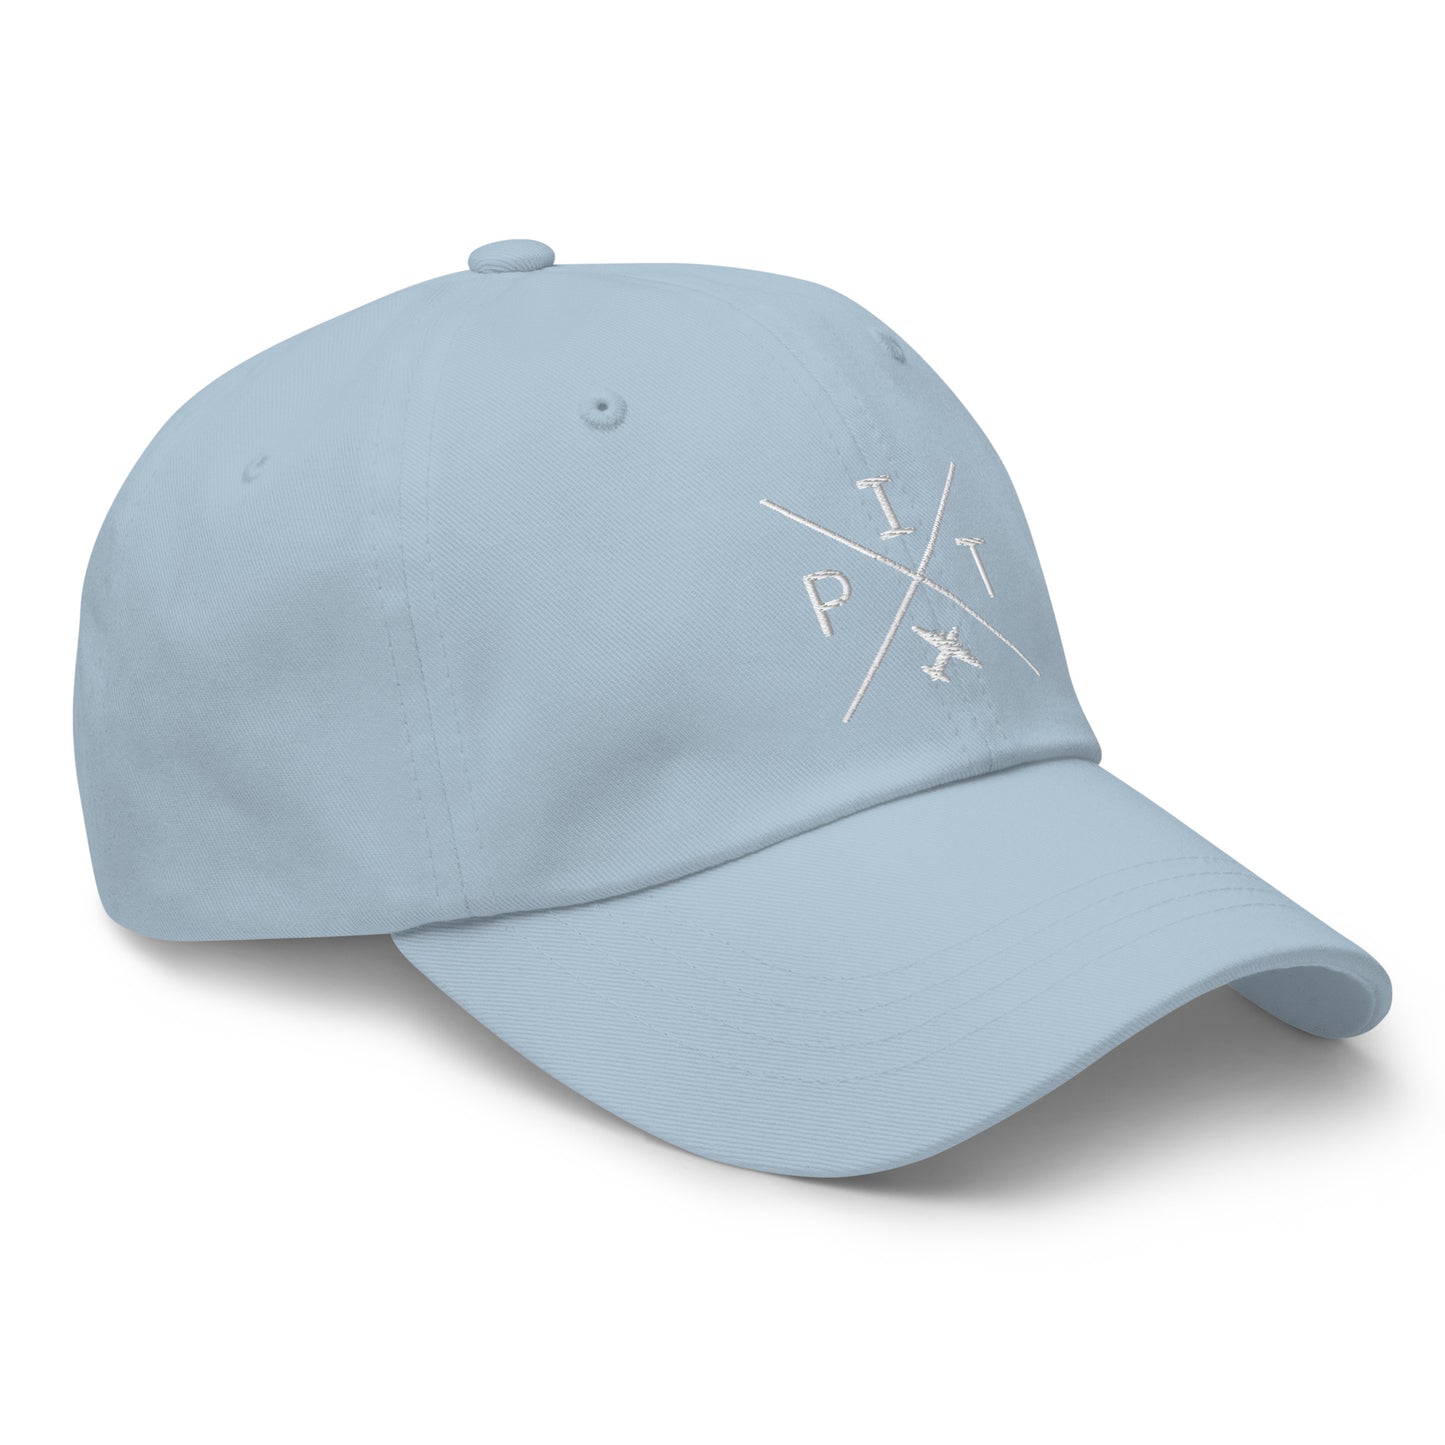 Crossed-X Dad Hat - White • PIT Pittsburgh • YHM Designs - Image 29